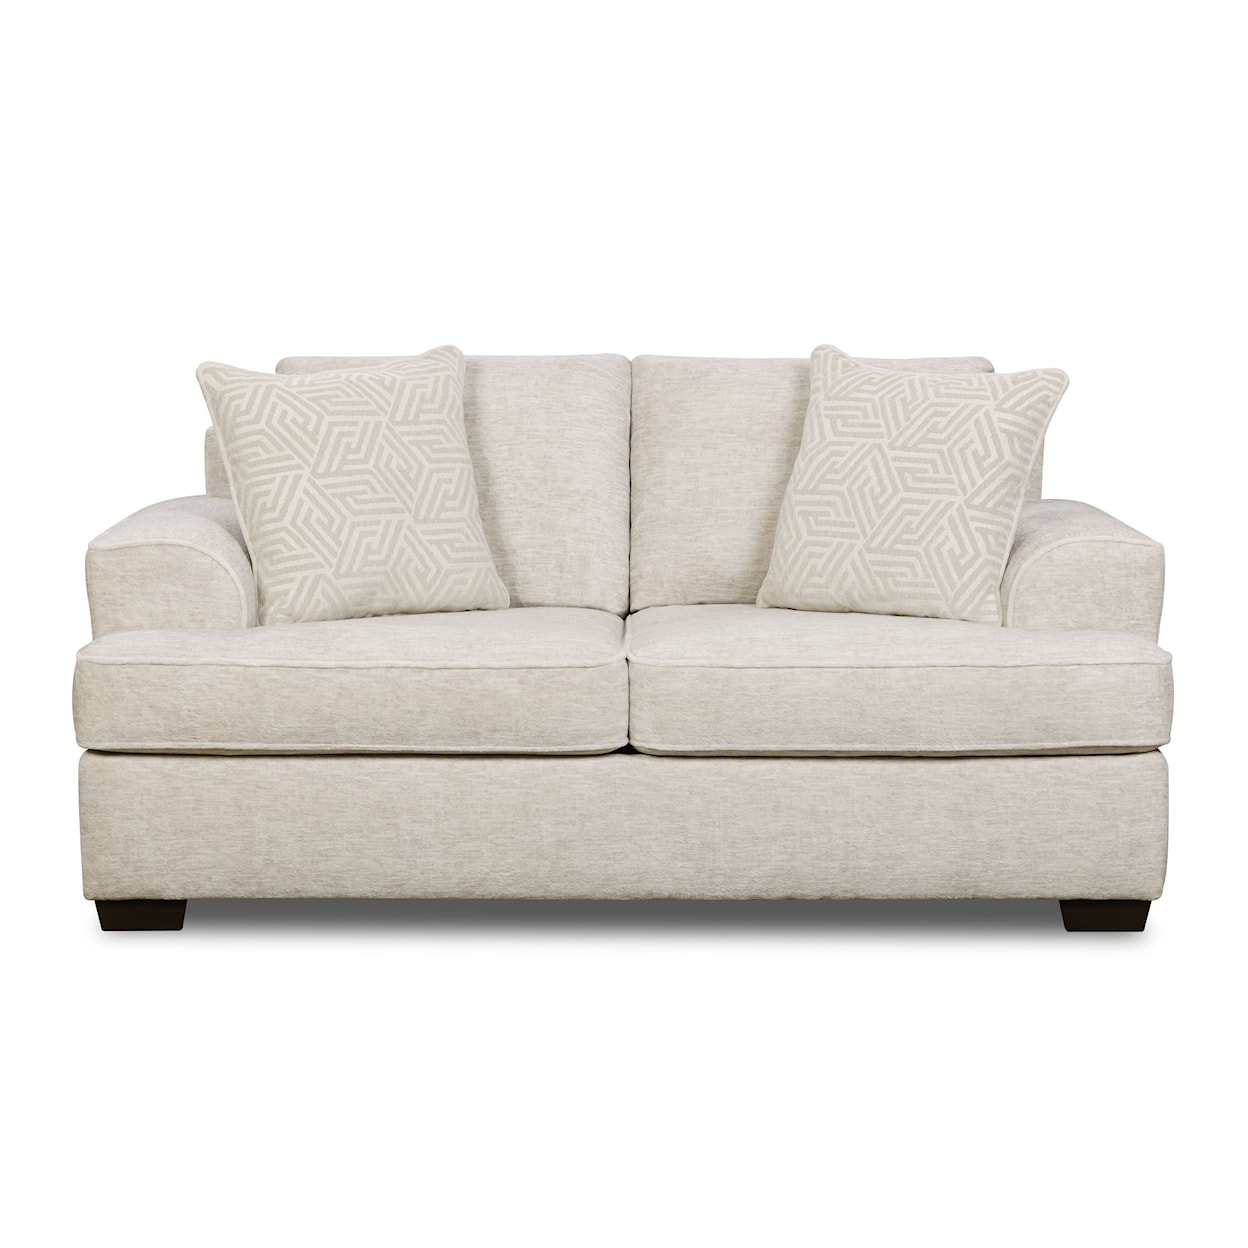 Behold Home 2580 Ritzy Loveseat